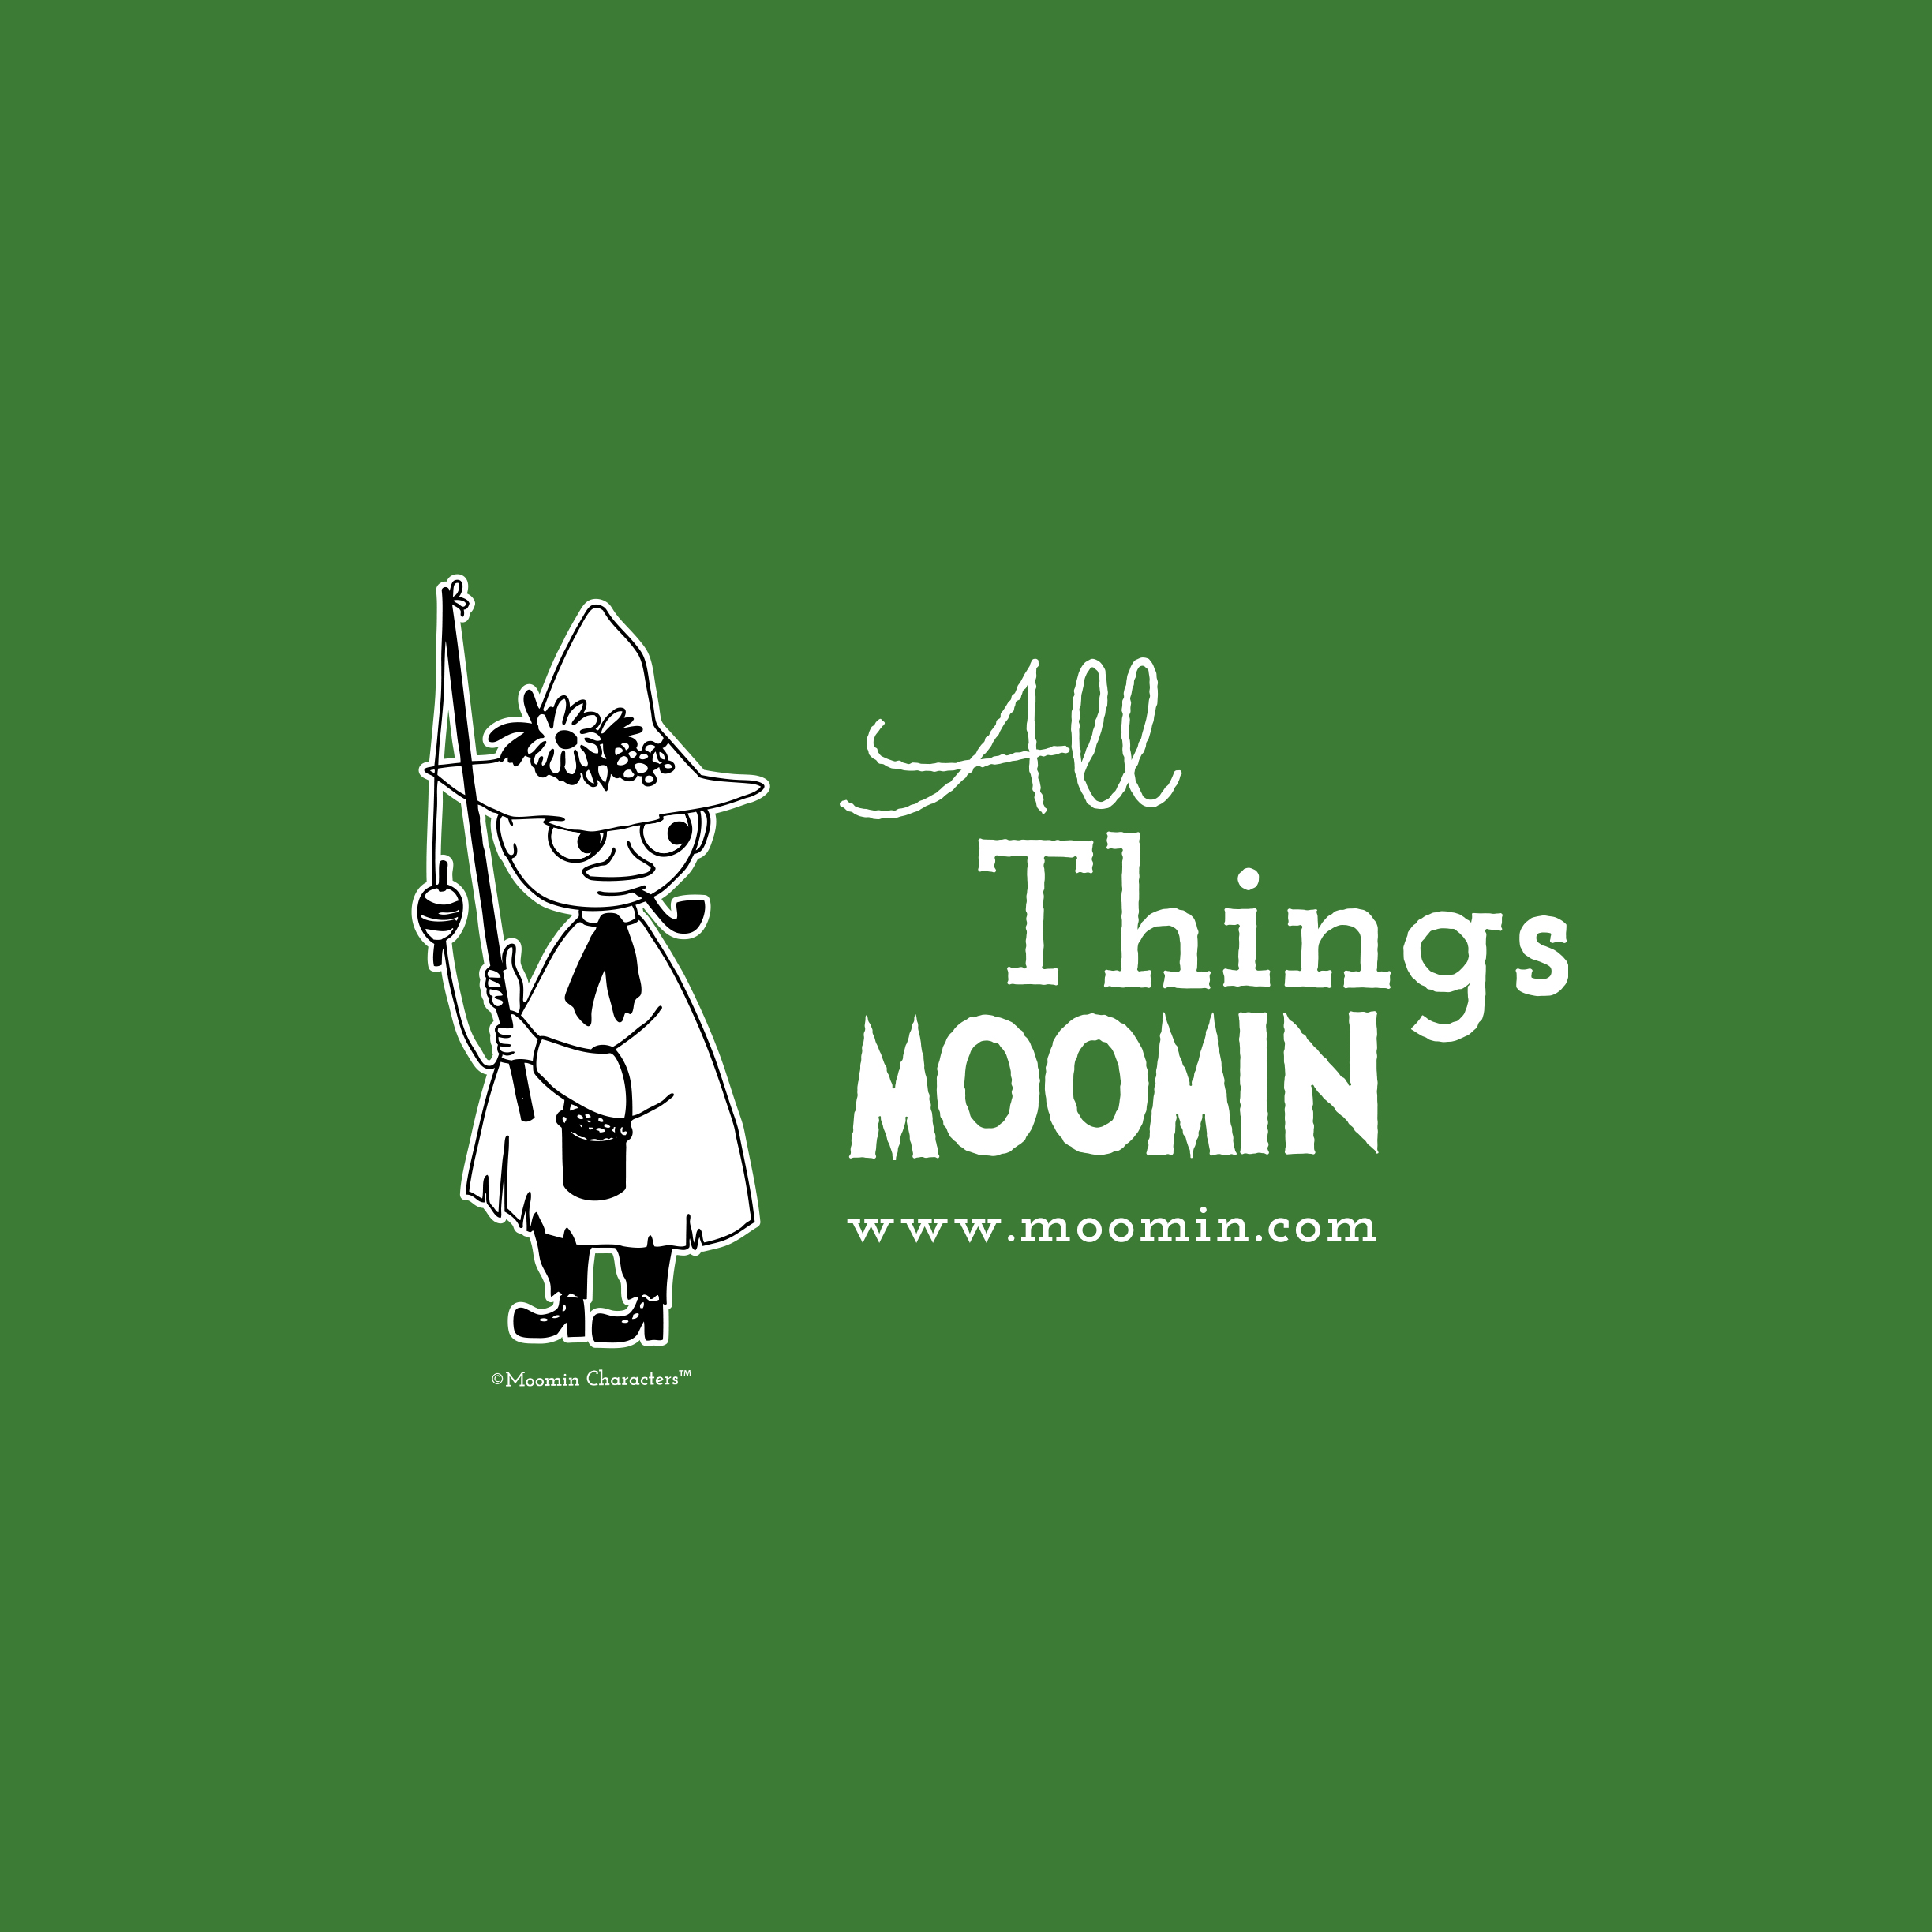 Our Moomin Wallpaper In June Features Snufkin Moomin